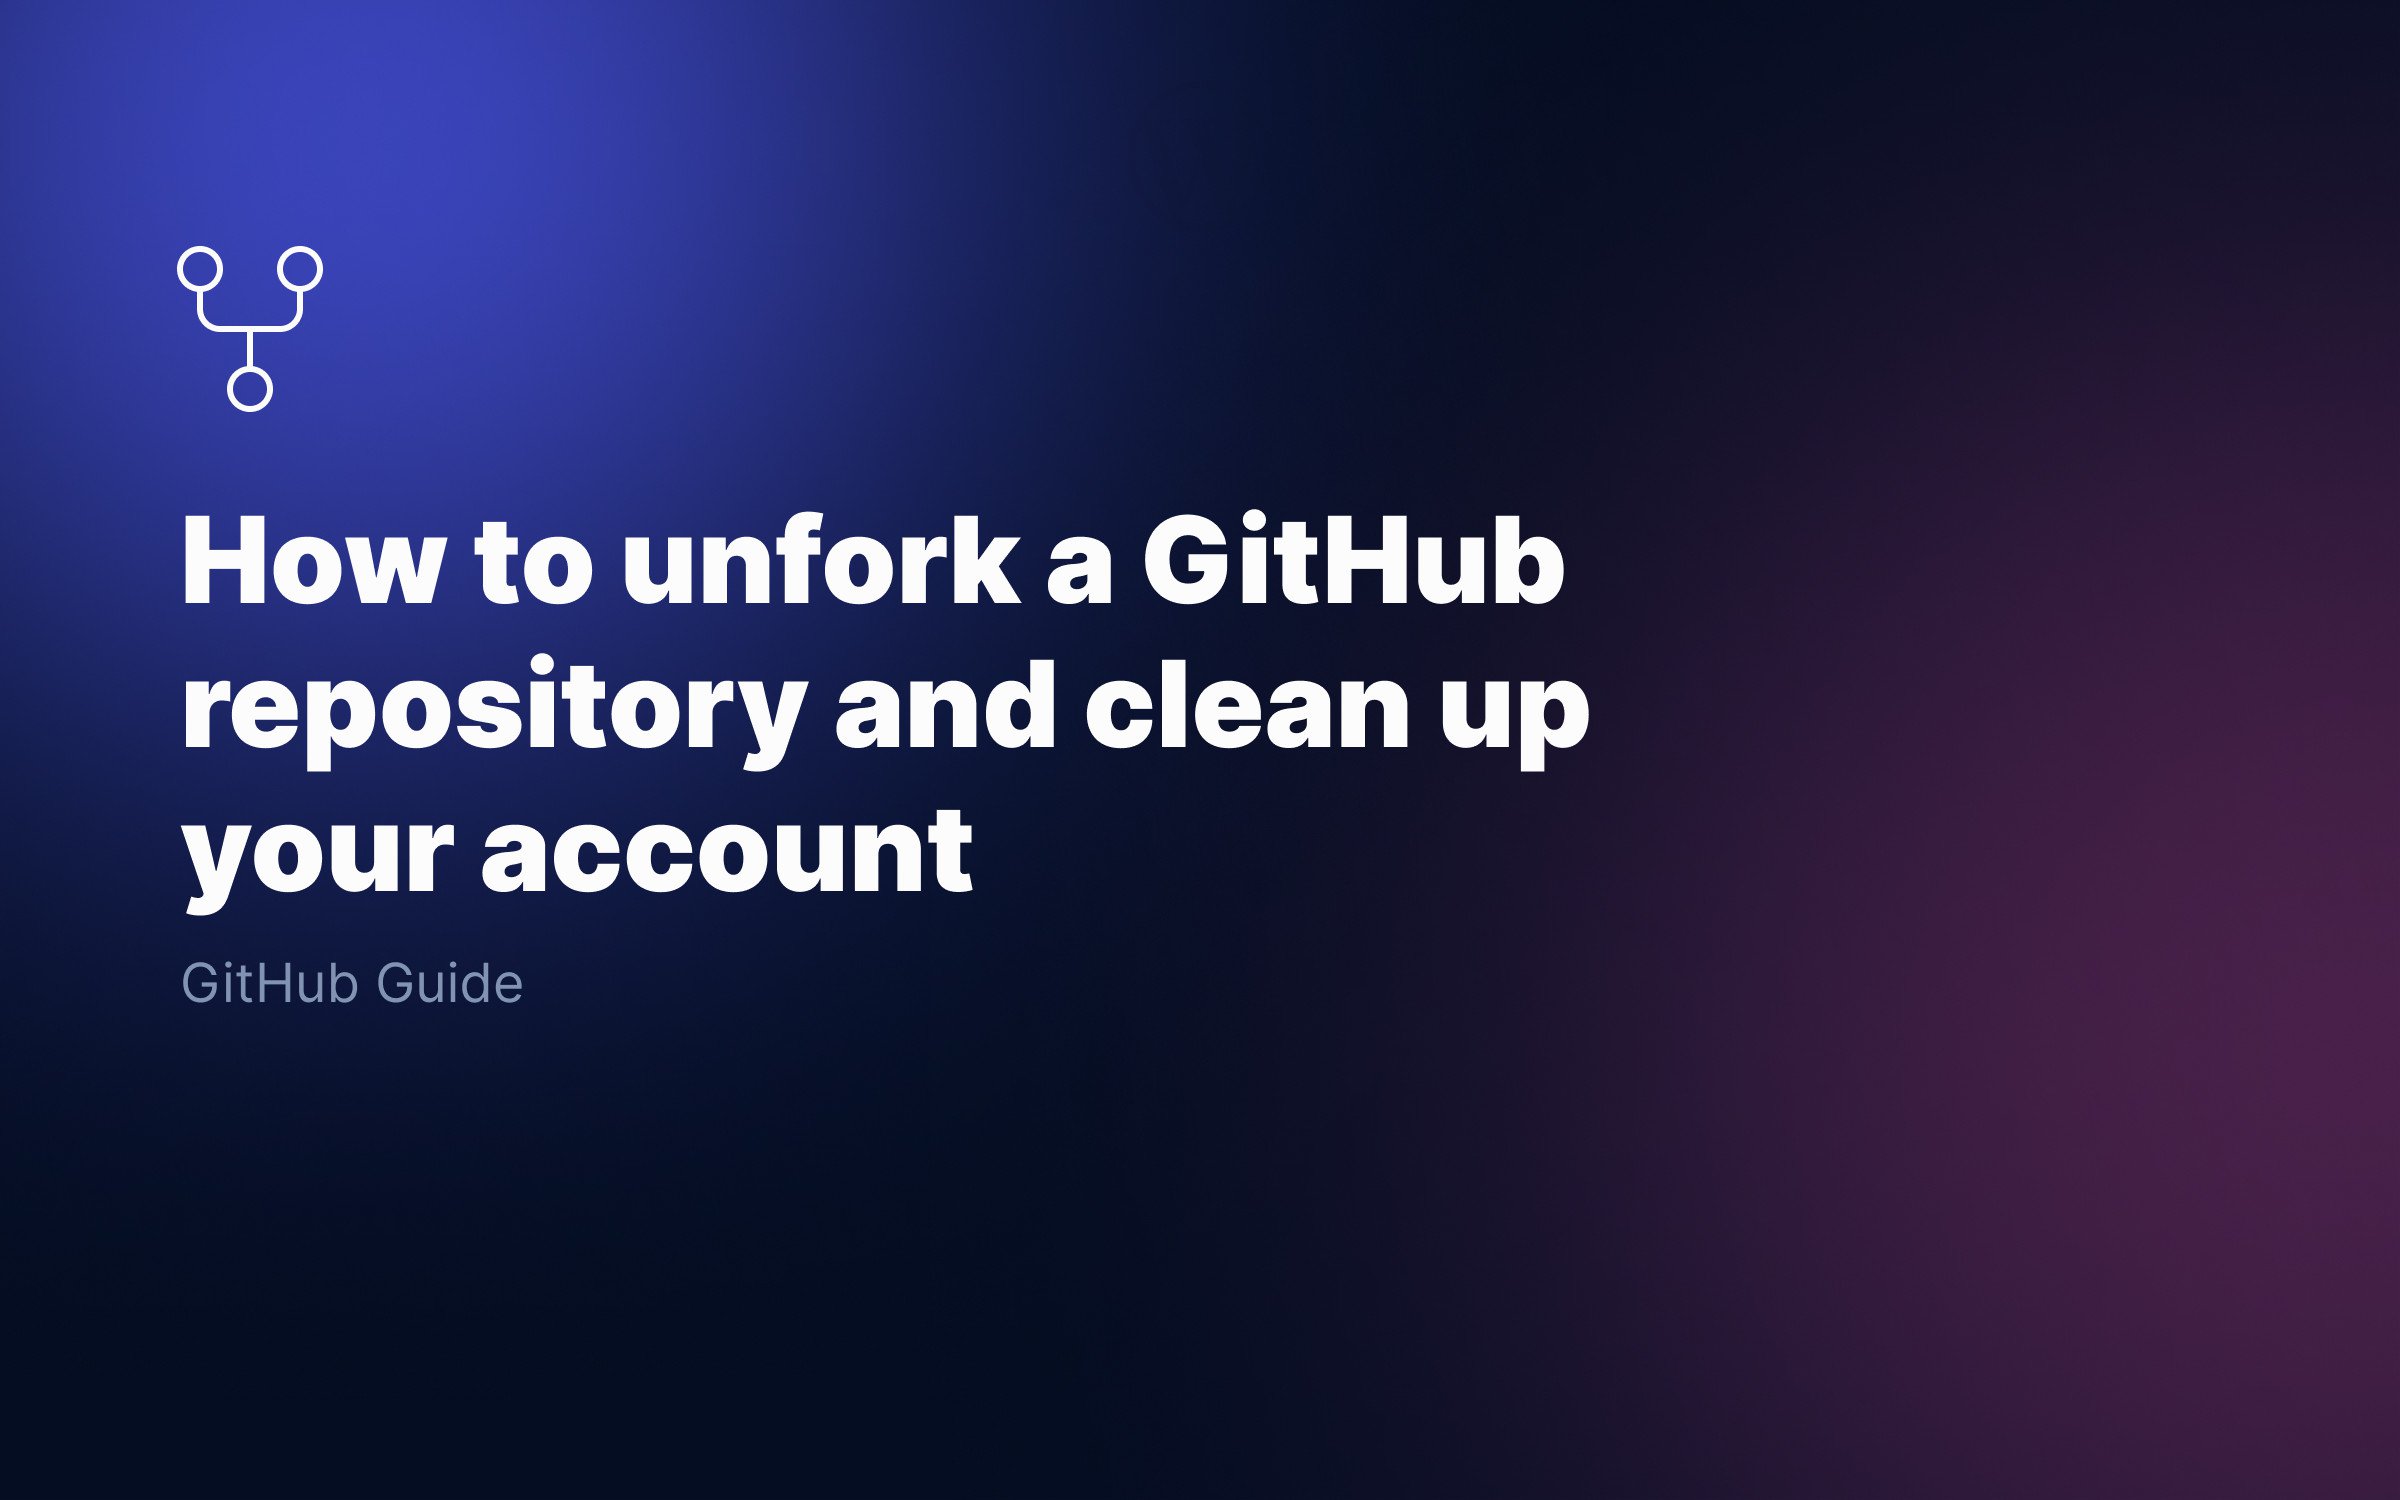 How to unfork a GitHub repository (2022 official method)